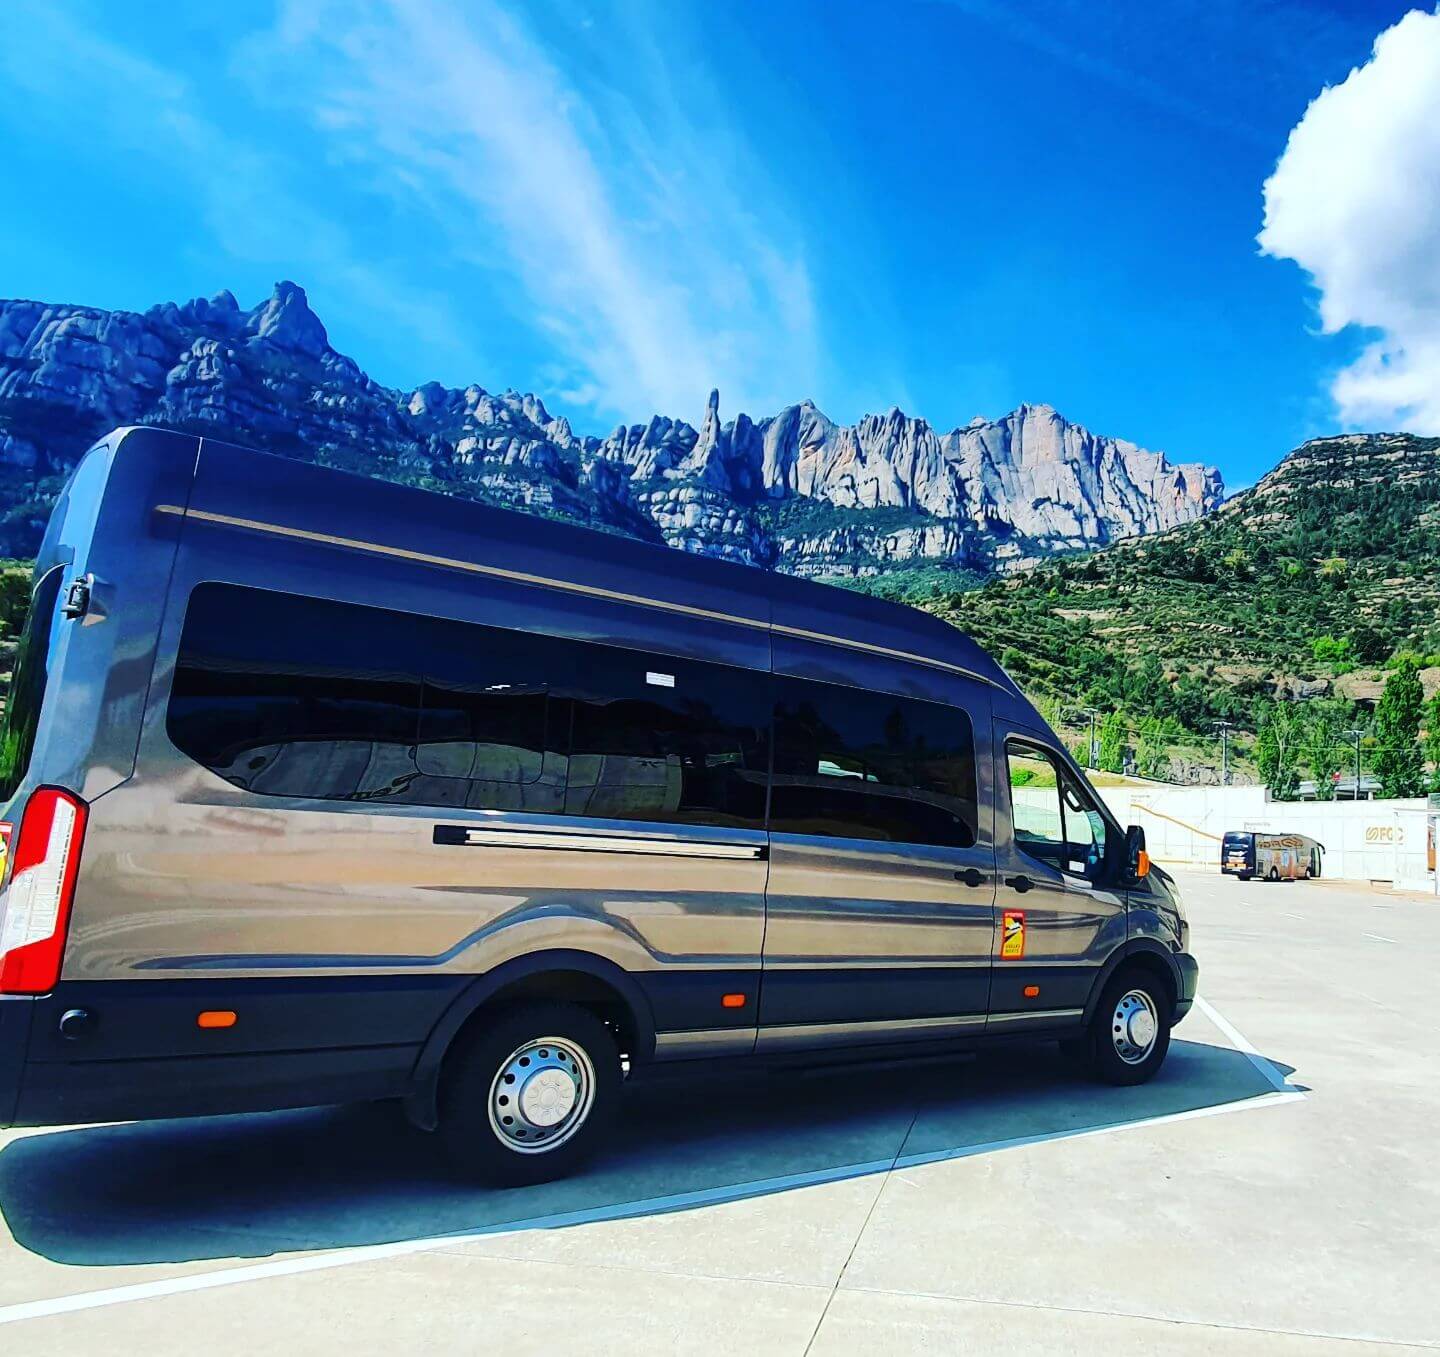 Rent a 10 seater Microbus (Ford Transit 2012) from J2 jaume transfer SL from Sant Cebrià de Vallalta 